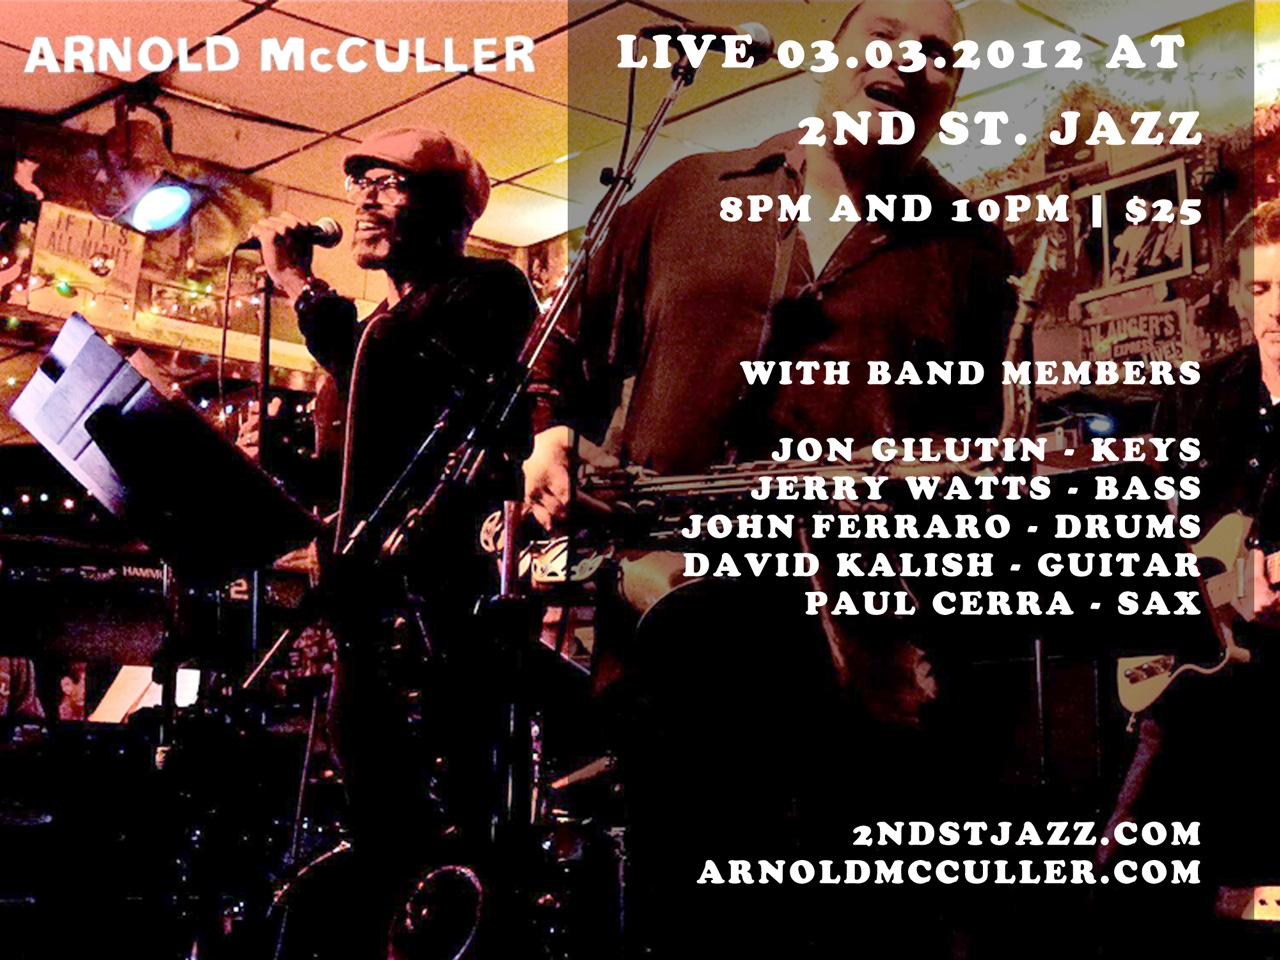 Arnold McCuller Los Angeles Shows – James Taylor Online